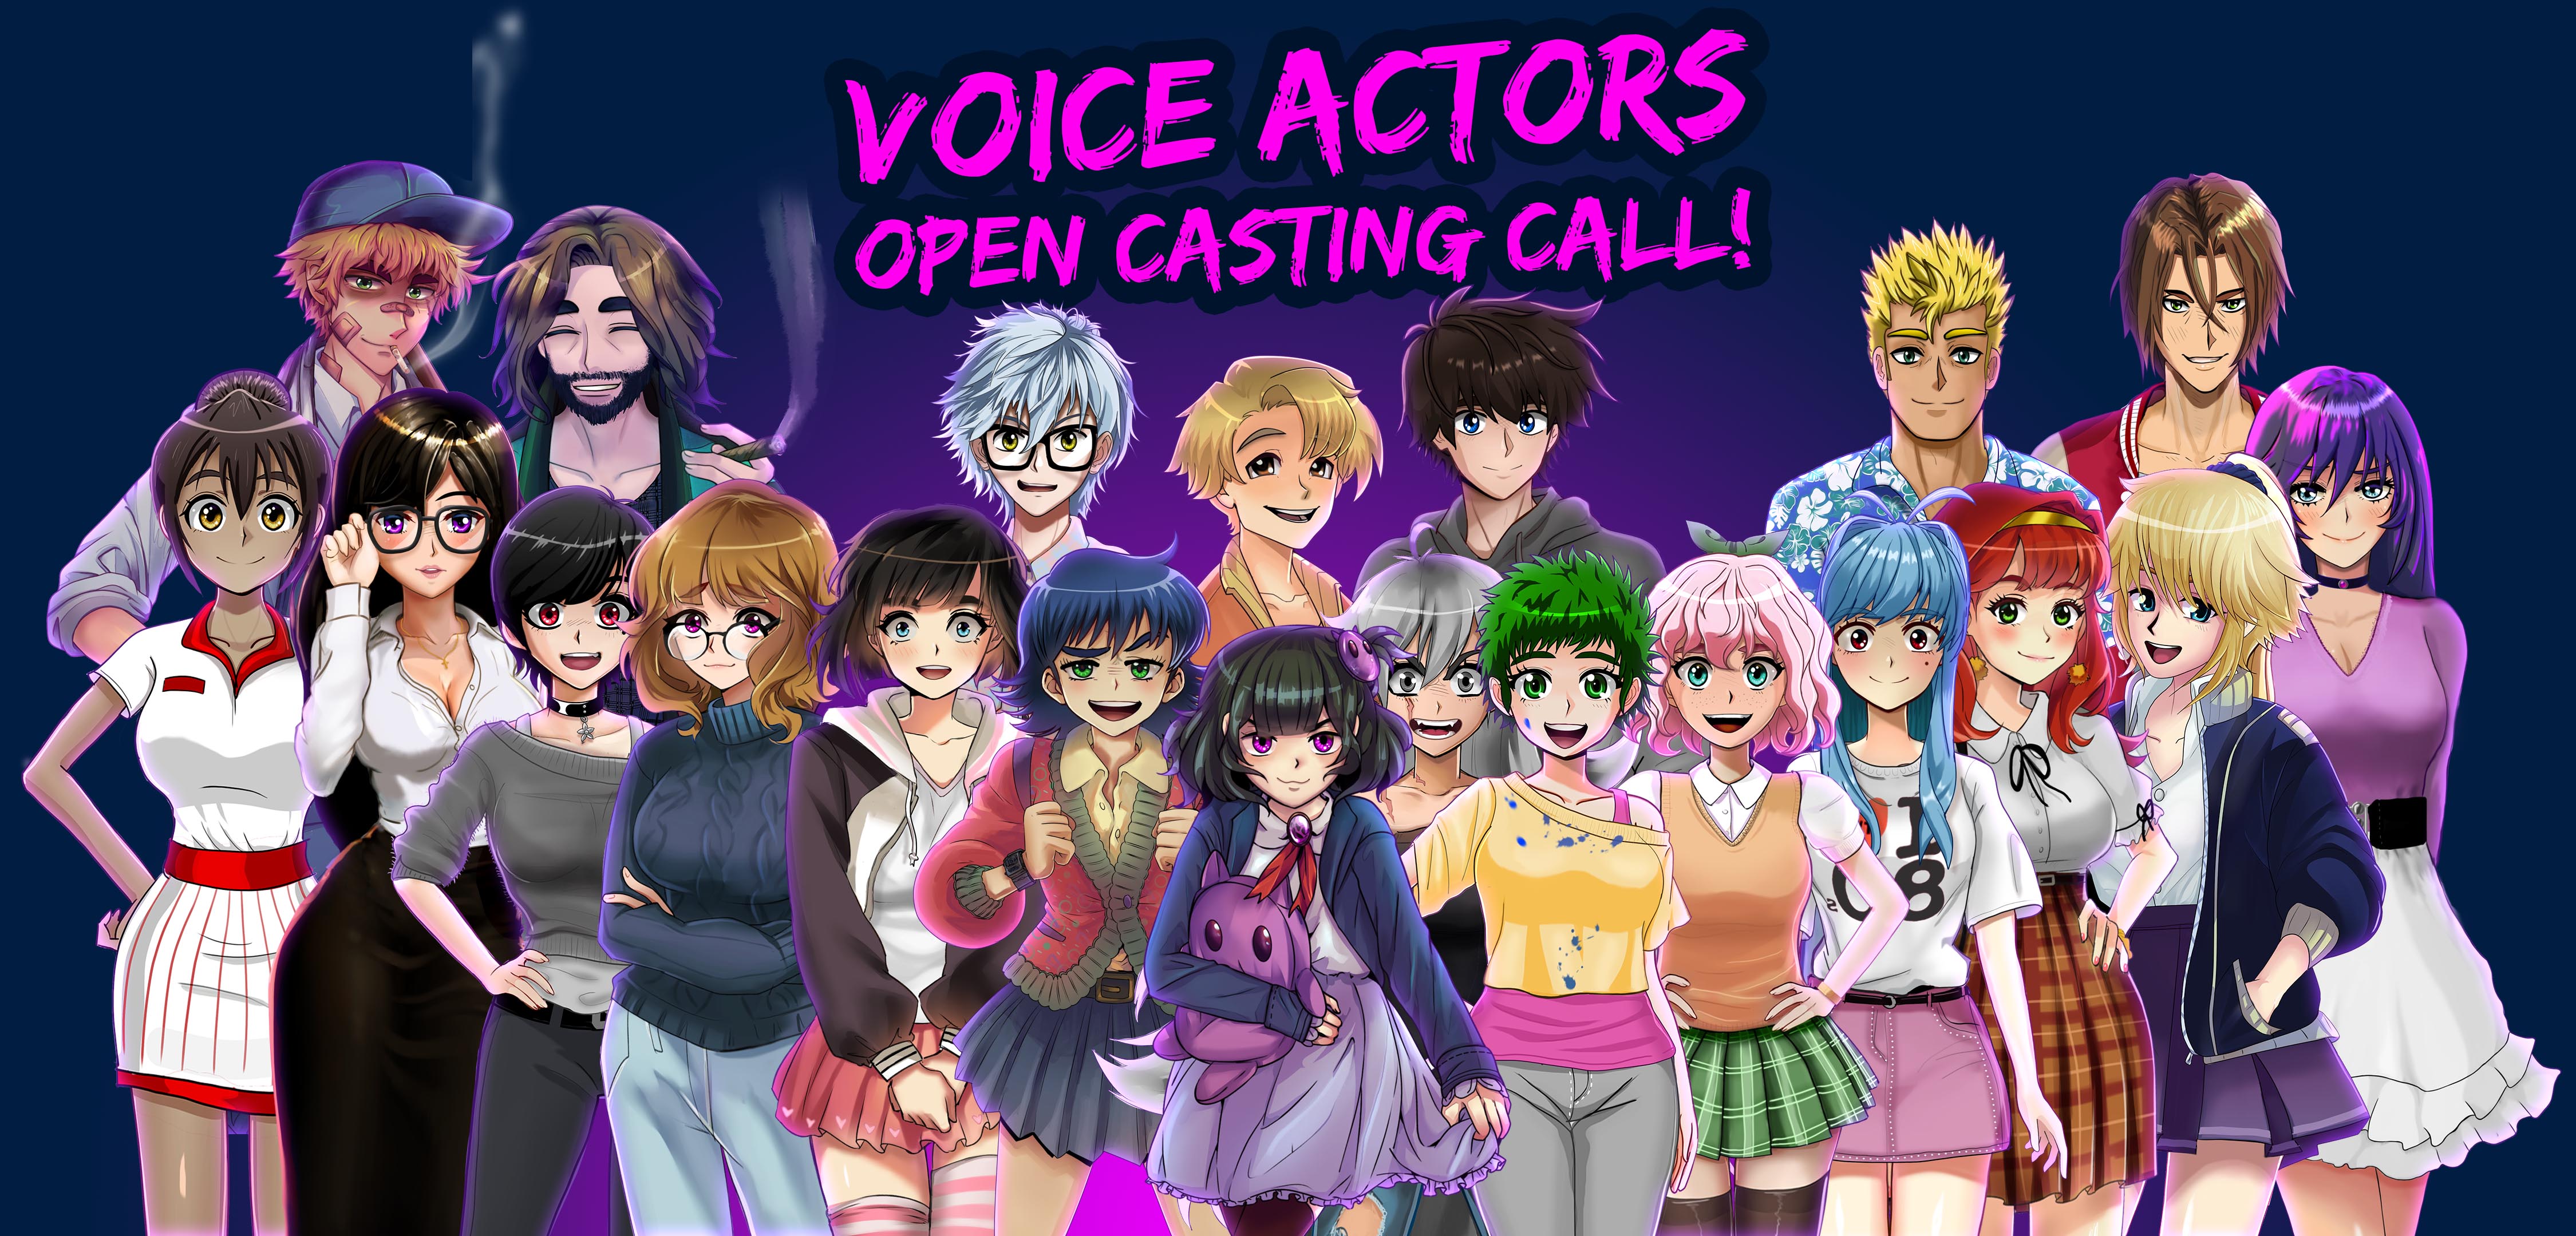 Voice acting - casting call! CLOSED - The Lost Delinquents of Rollings High  - DEMO by Jago Games